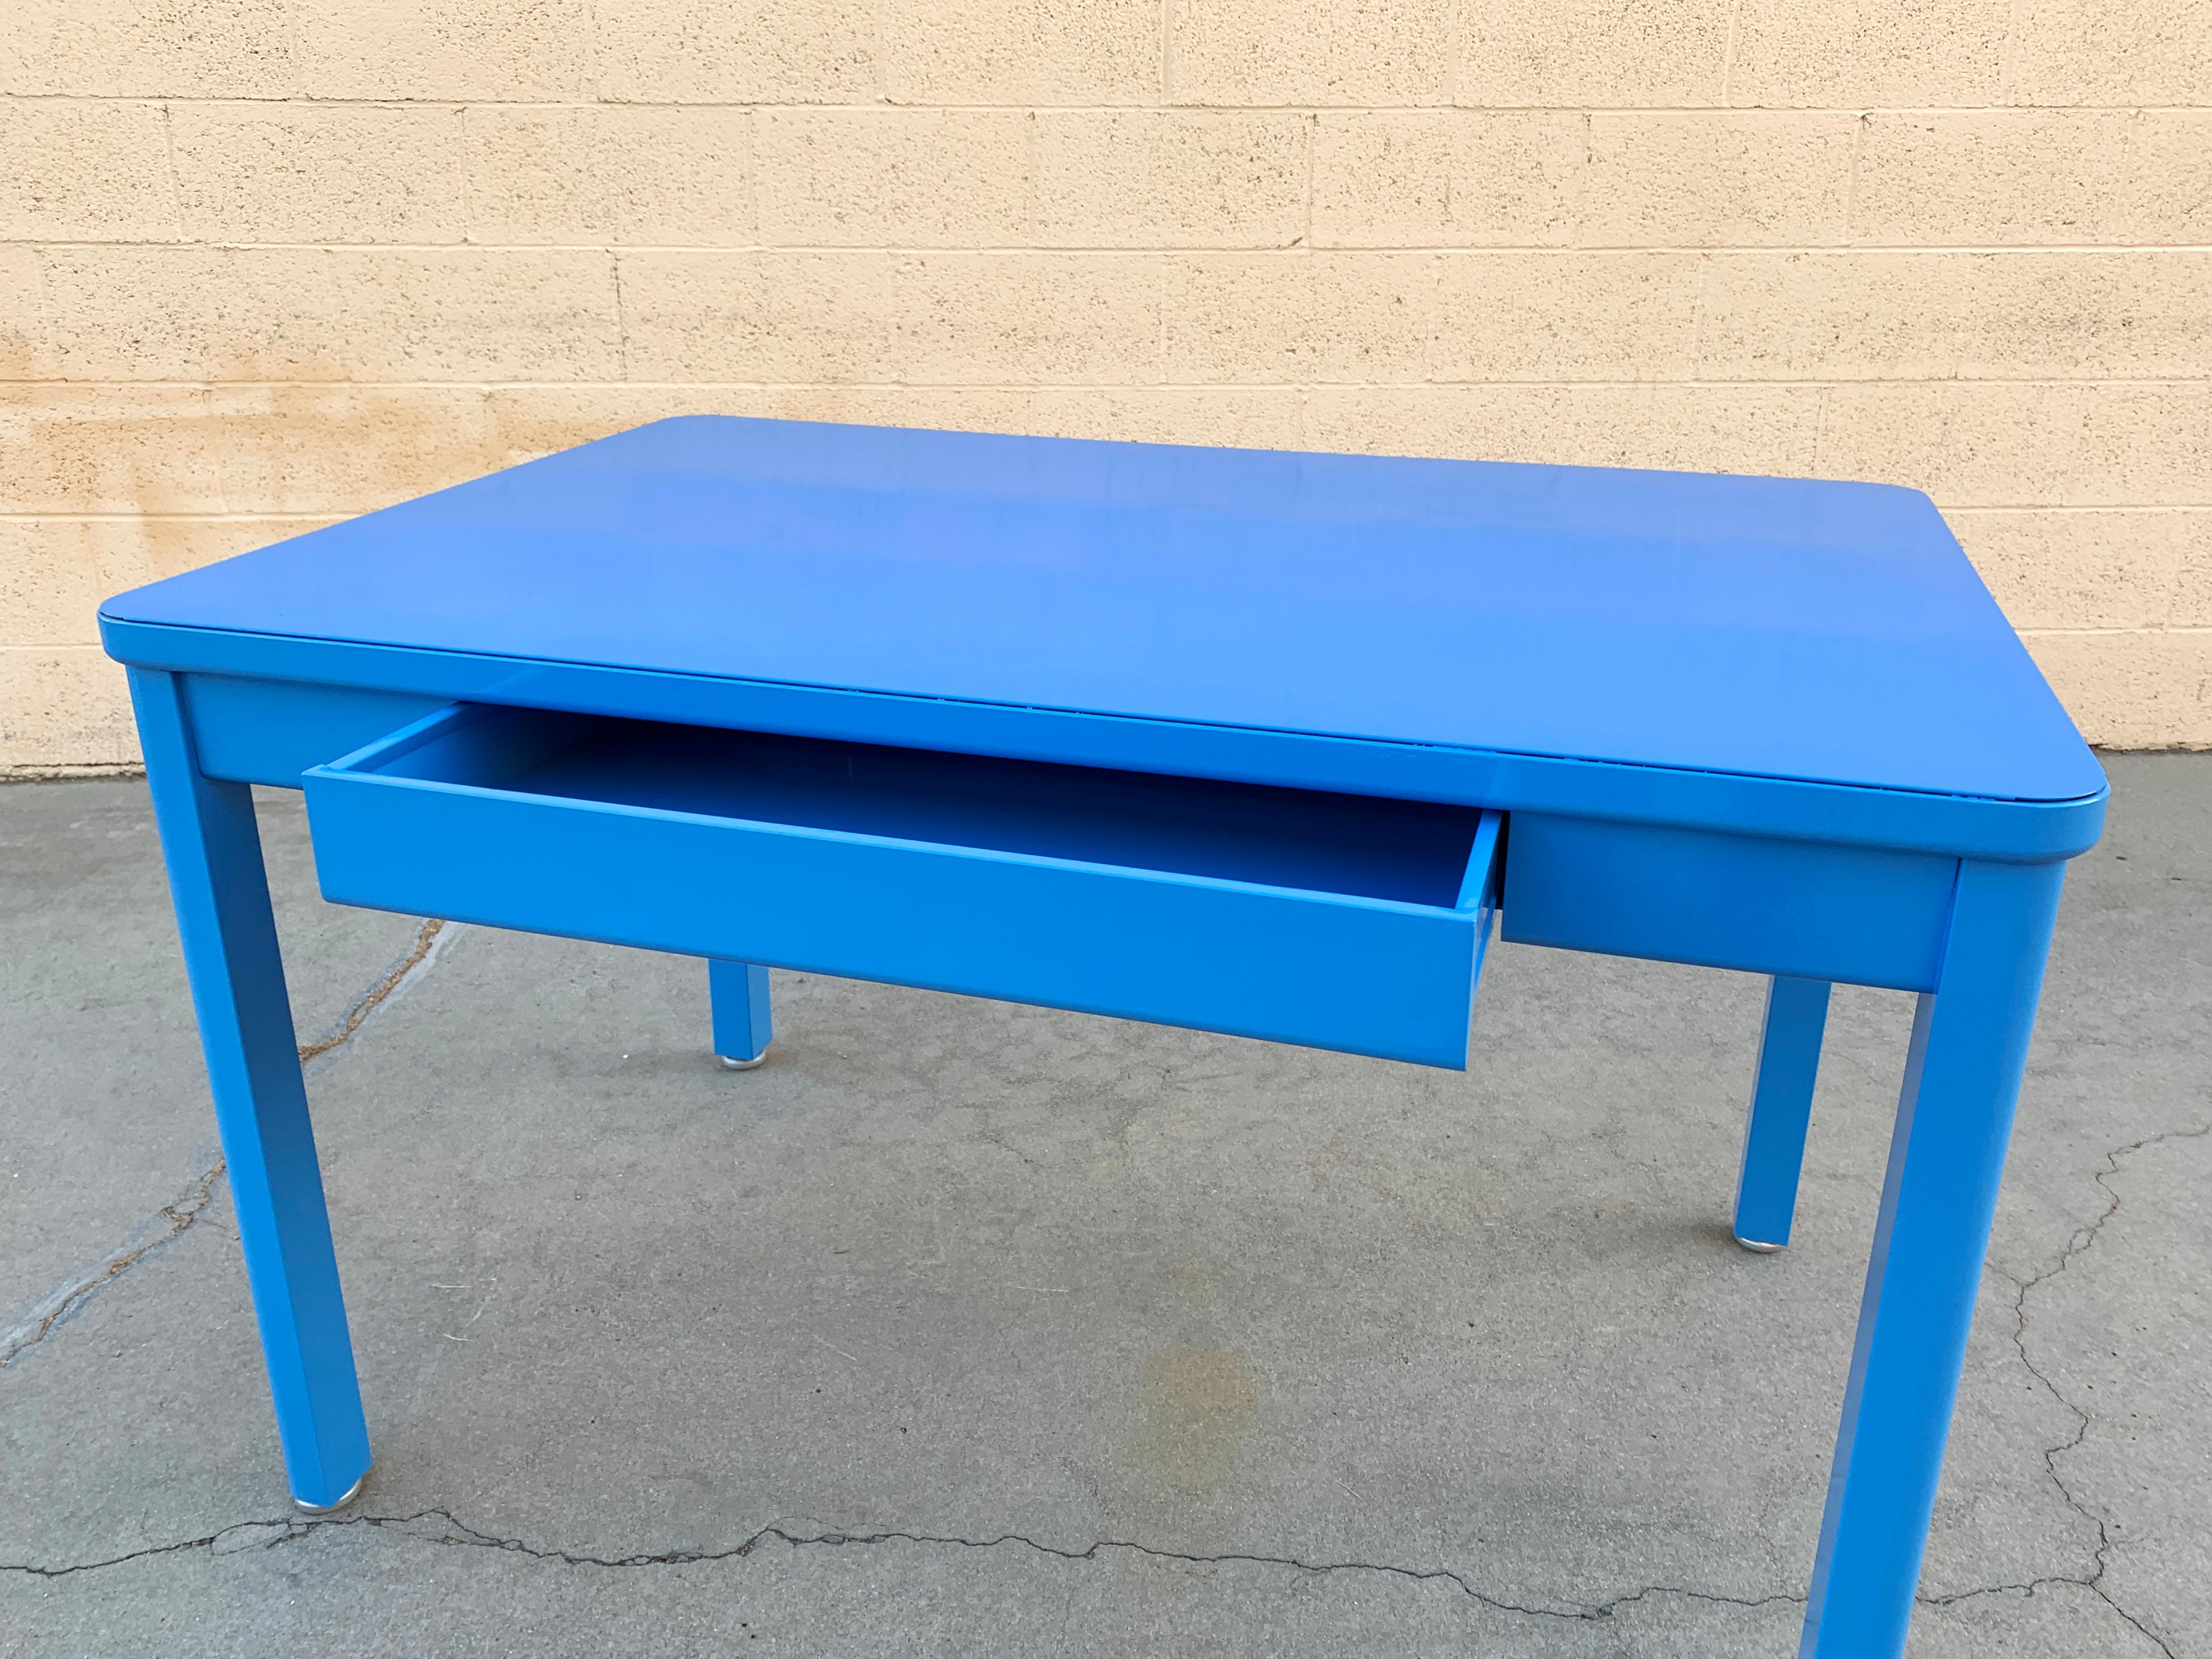 Mid-20th Century 1960s Tanker Table by Steelcase, Refinished in Bright Blue